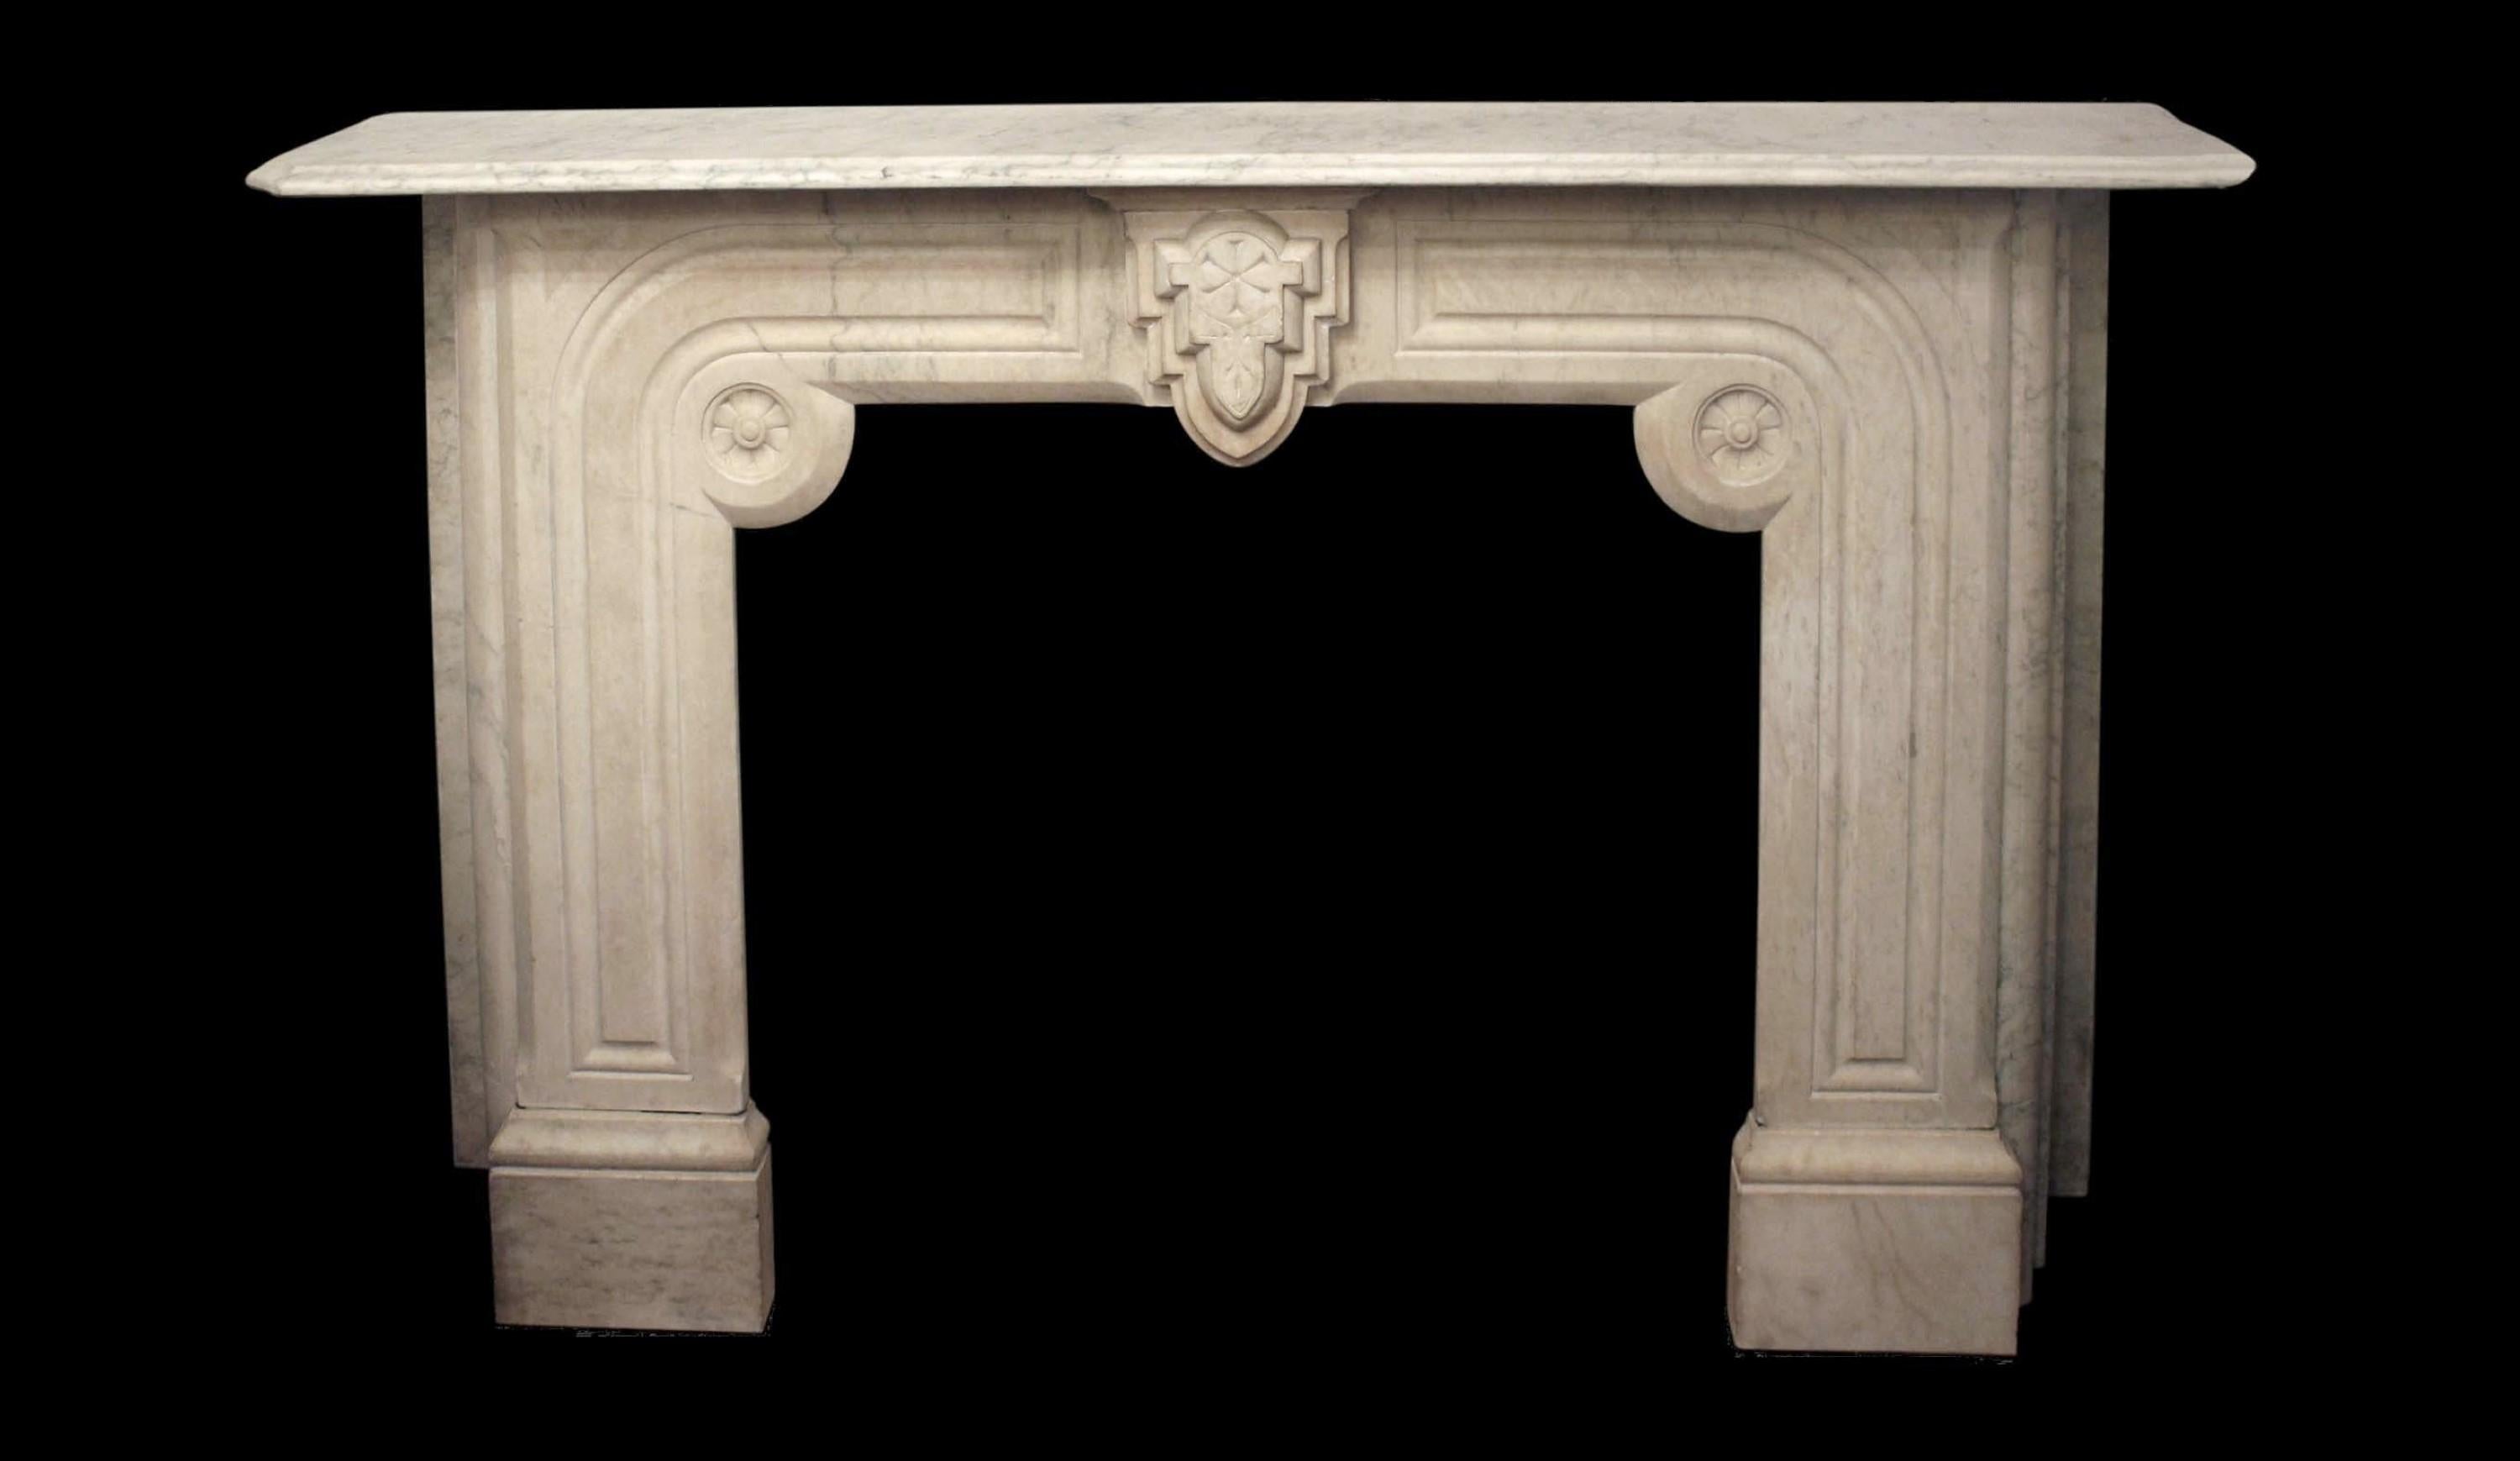 Dating back to the 1920s, this off-white marble mantel showcases elegant gray veining, accompanied by intricate carved geometric patterns interwoven with delicate foliate motifs. The presence of these geometric details renders it a fitting choice